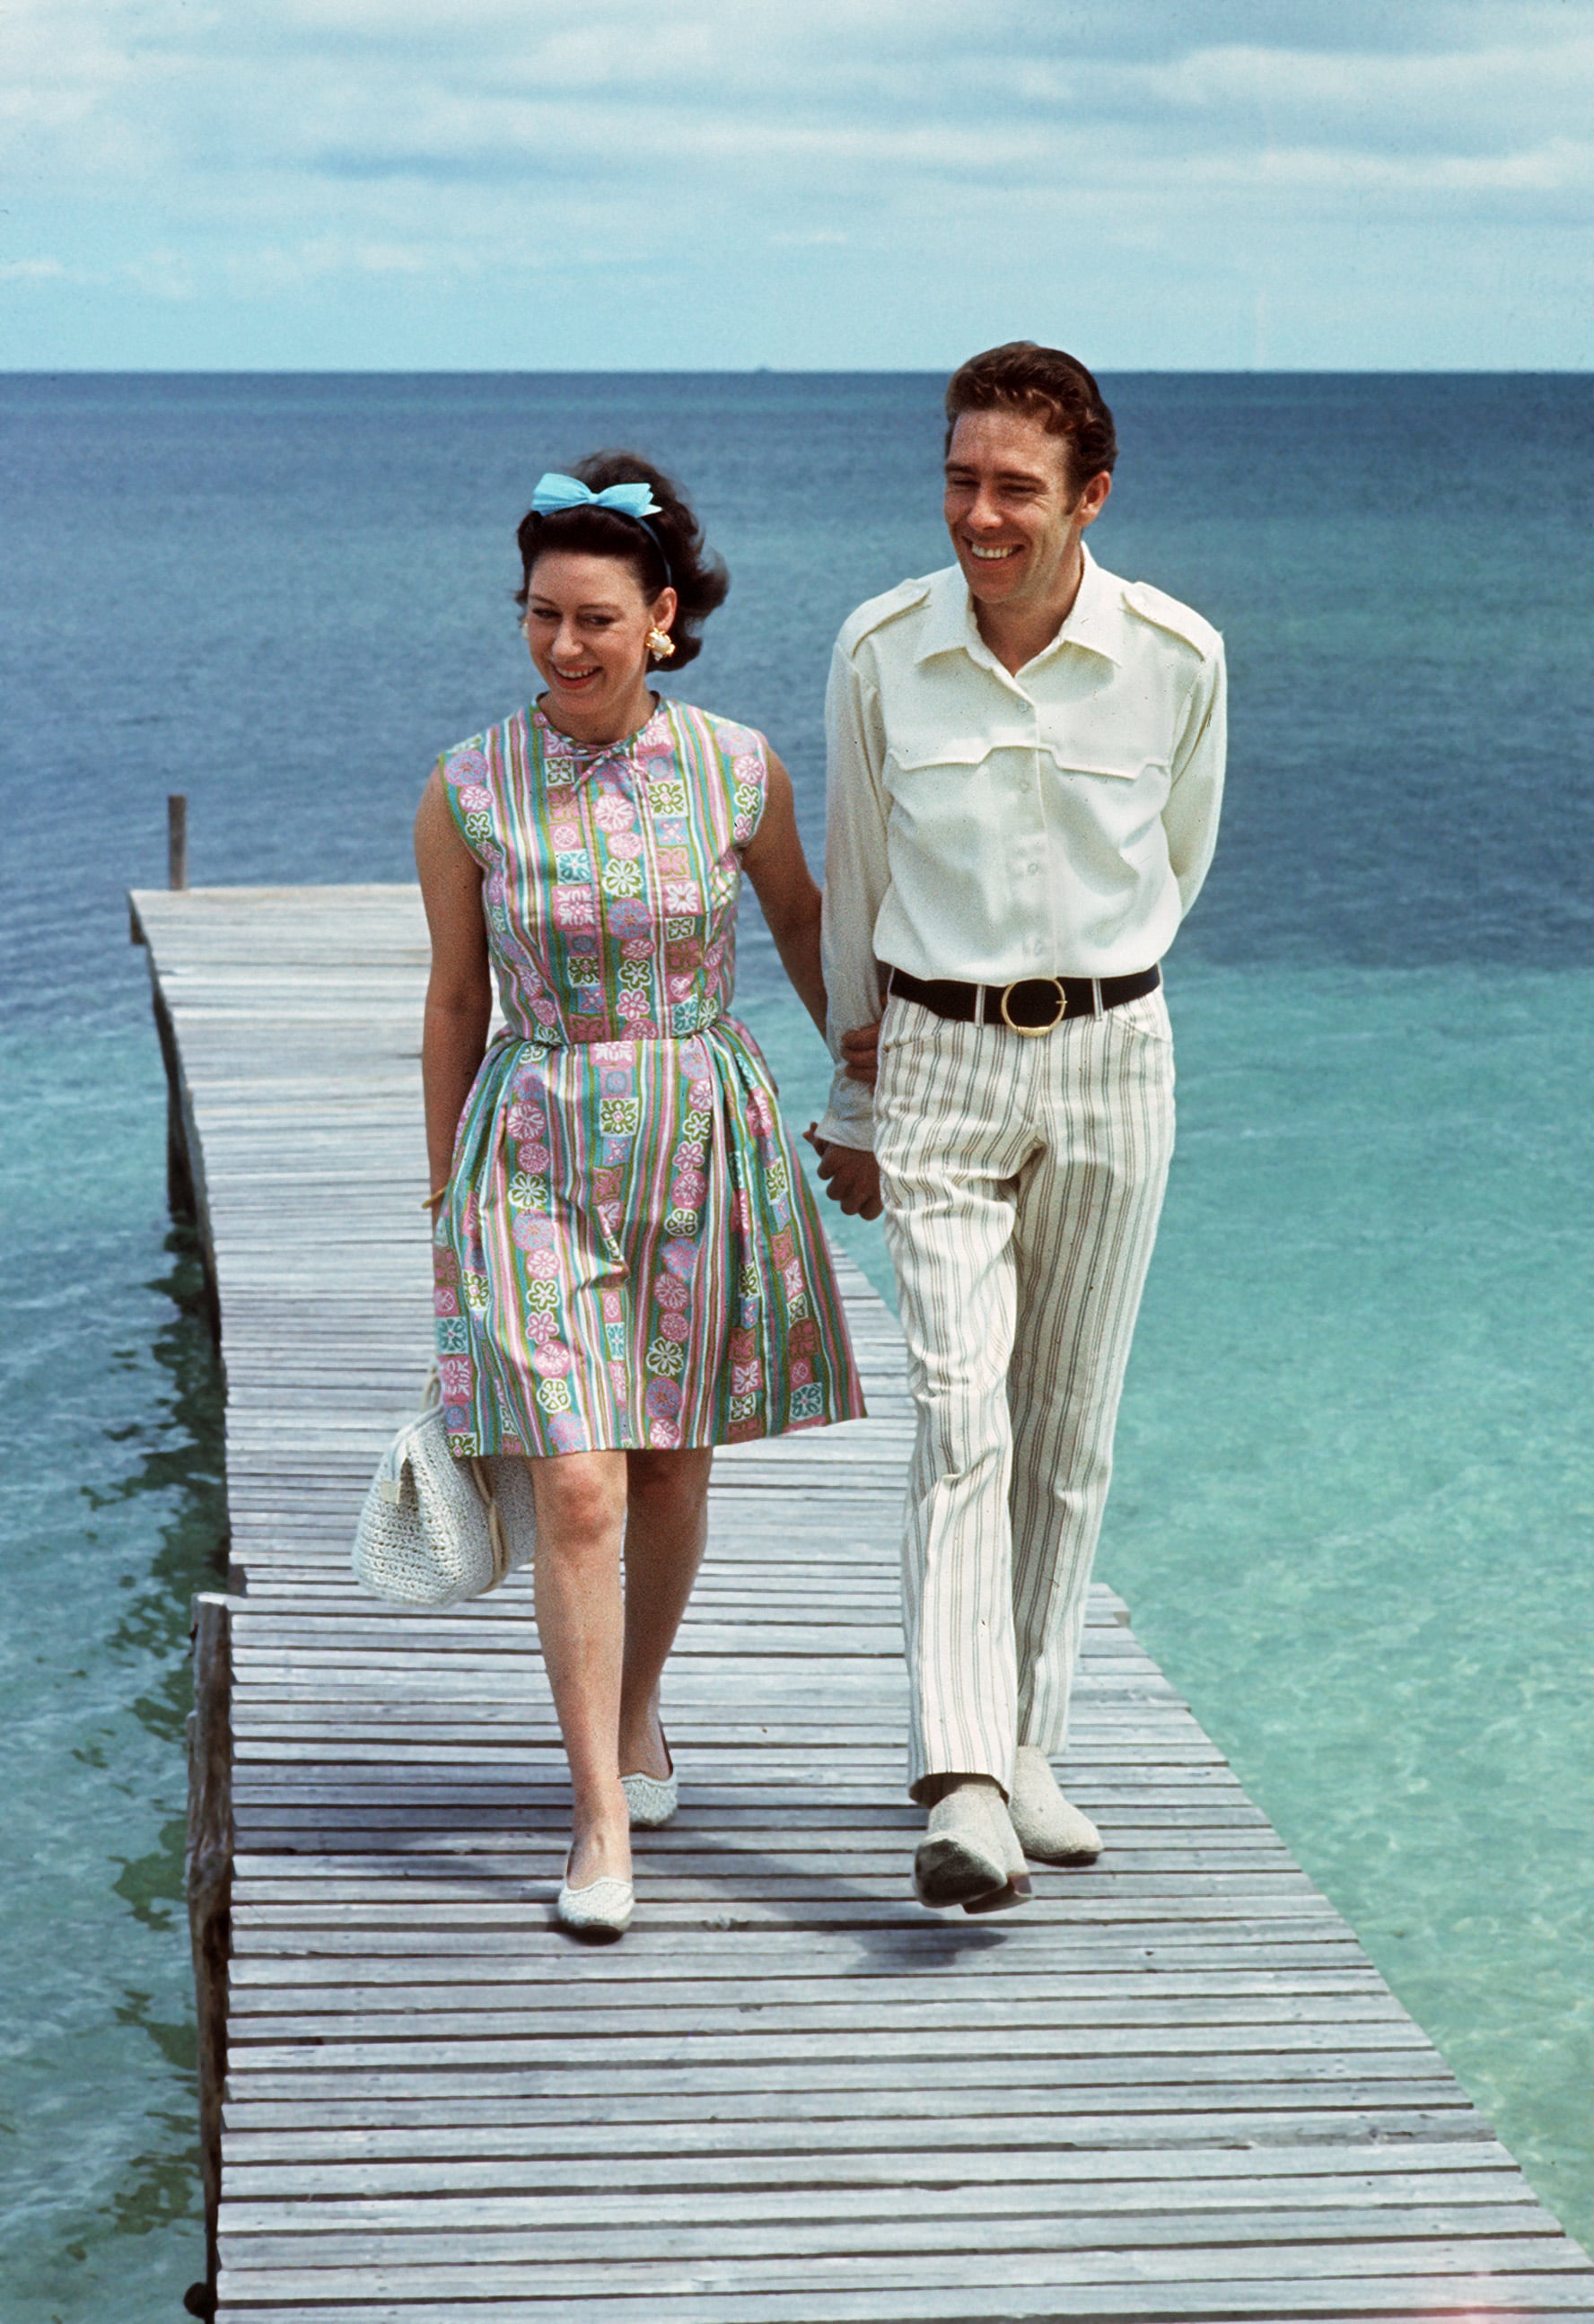 NASSAU, BAHAMAS - MARCH 14:  Princess Margaret, the younger sister of Britain's Queen Elizabeth II, walks 14 March 1967 with her husband Earl of Snowdon on a pontoon in the Bahamas. Princess Margaret and the Earl of Snowdon had two children, son Linley and daughter Sarah, but announced their separation in March 1976. When the marriage was officially ended two years later, Margaret became the first royal to divorce since Henry VIII in the 16th century.  (Photo credit should read DALMAS/AFP/Getty Images)